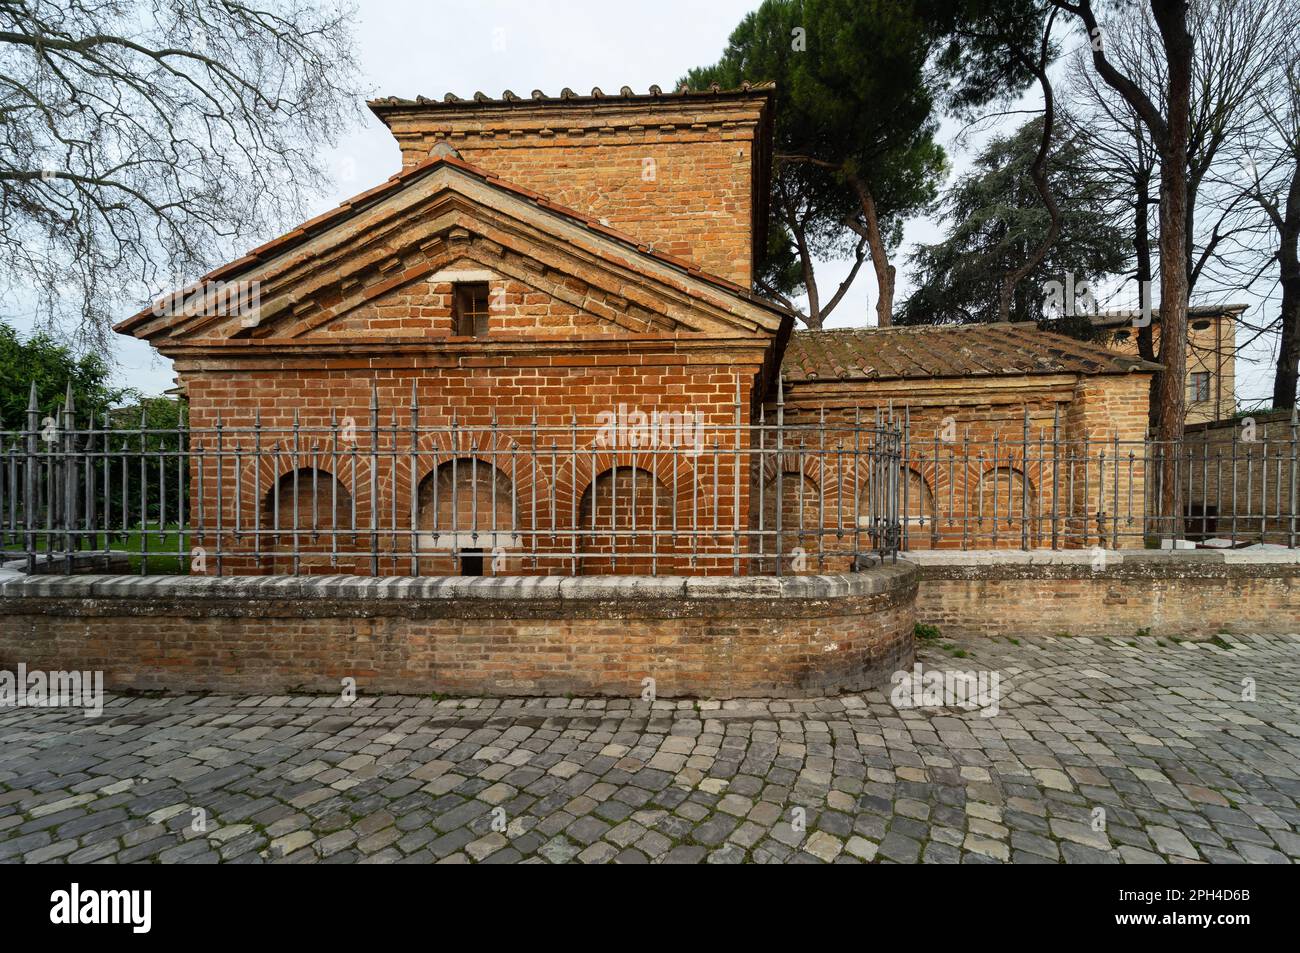 The Mausoleum of Galla Placidia in Ravenna, Emilia-Romagna, Italy; a late antique Roman building and famous tourist attraction built 425–450 Stock Photo